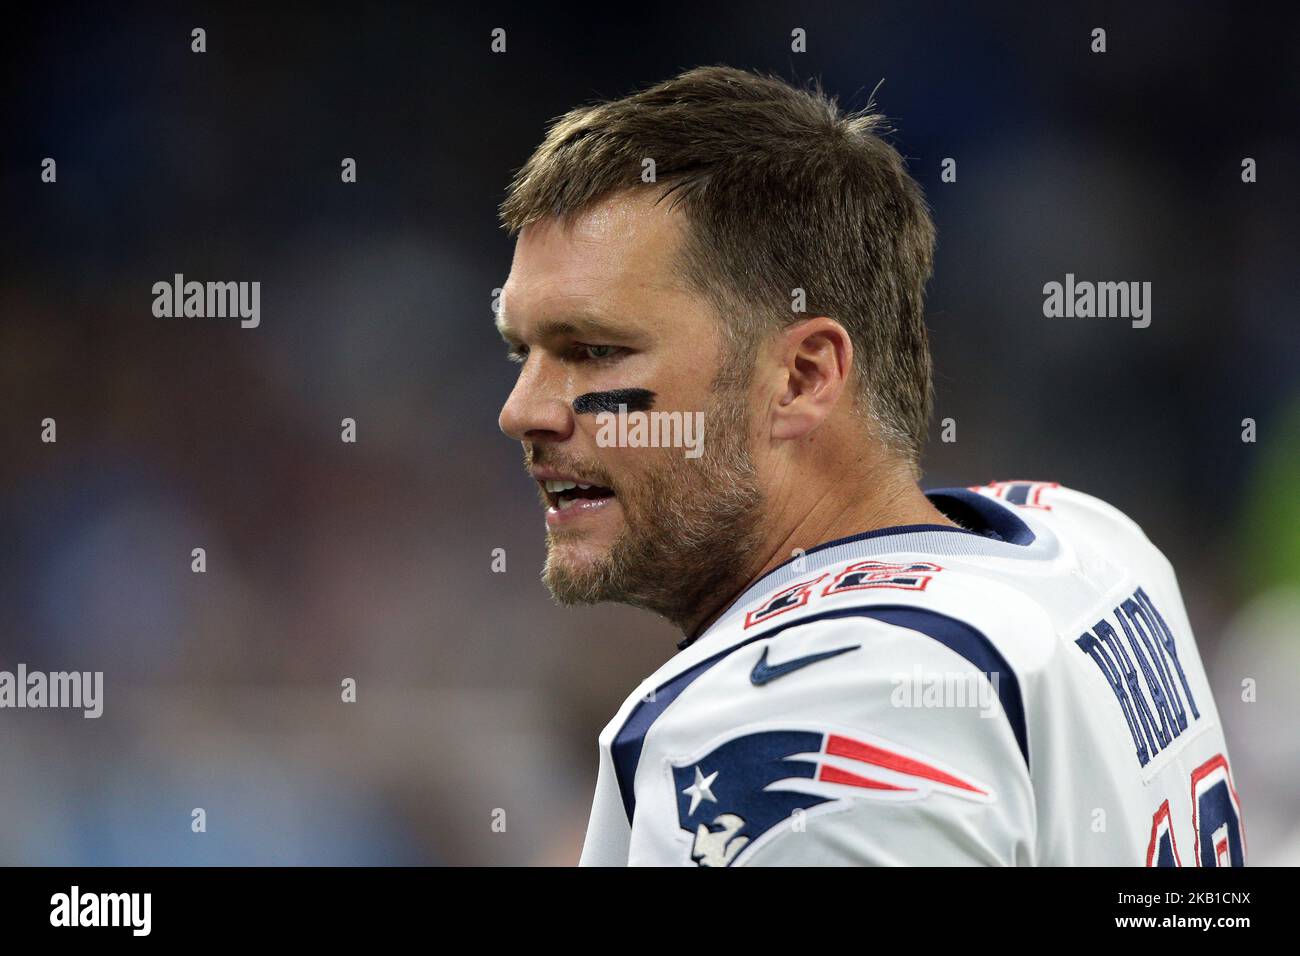 New England Patriots quarterback Tom Brady #12 talks to teammates during the first half of an NFL football game against the Detroit Lions in Detroit, Michigan USA, on Thursday, September 23, 2018. (Photo by Jorge Lemus/NurPhoto) Stock Photo